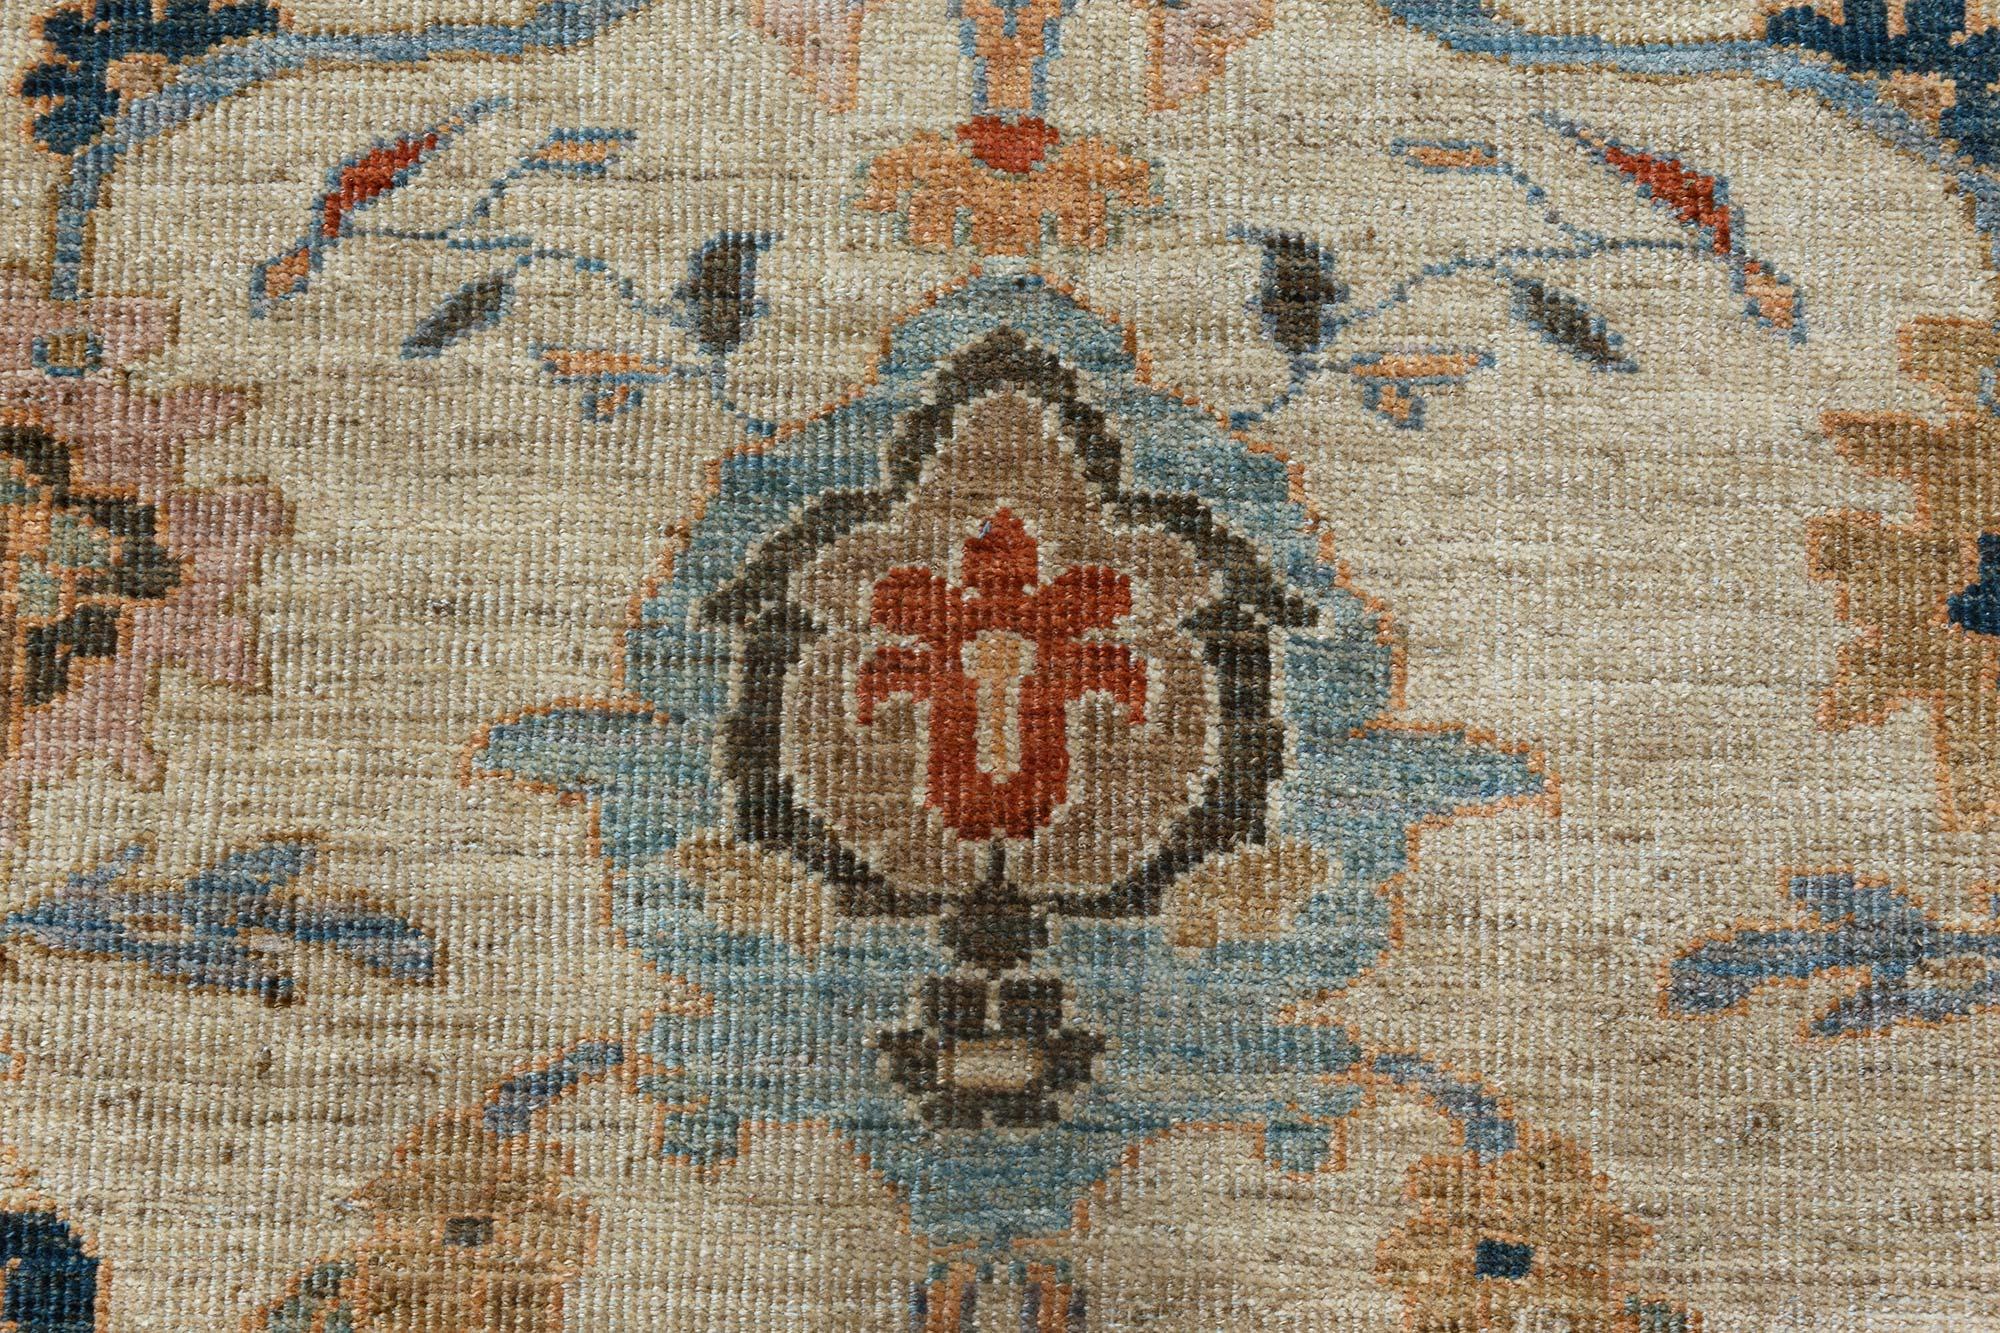 Contemporary sultanabad style handmade wool rug by Doris Leslie Blau.
Size: 8'10